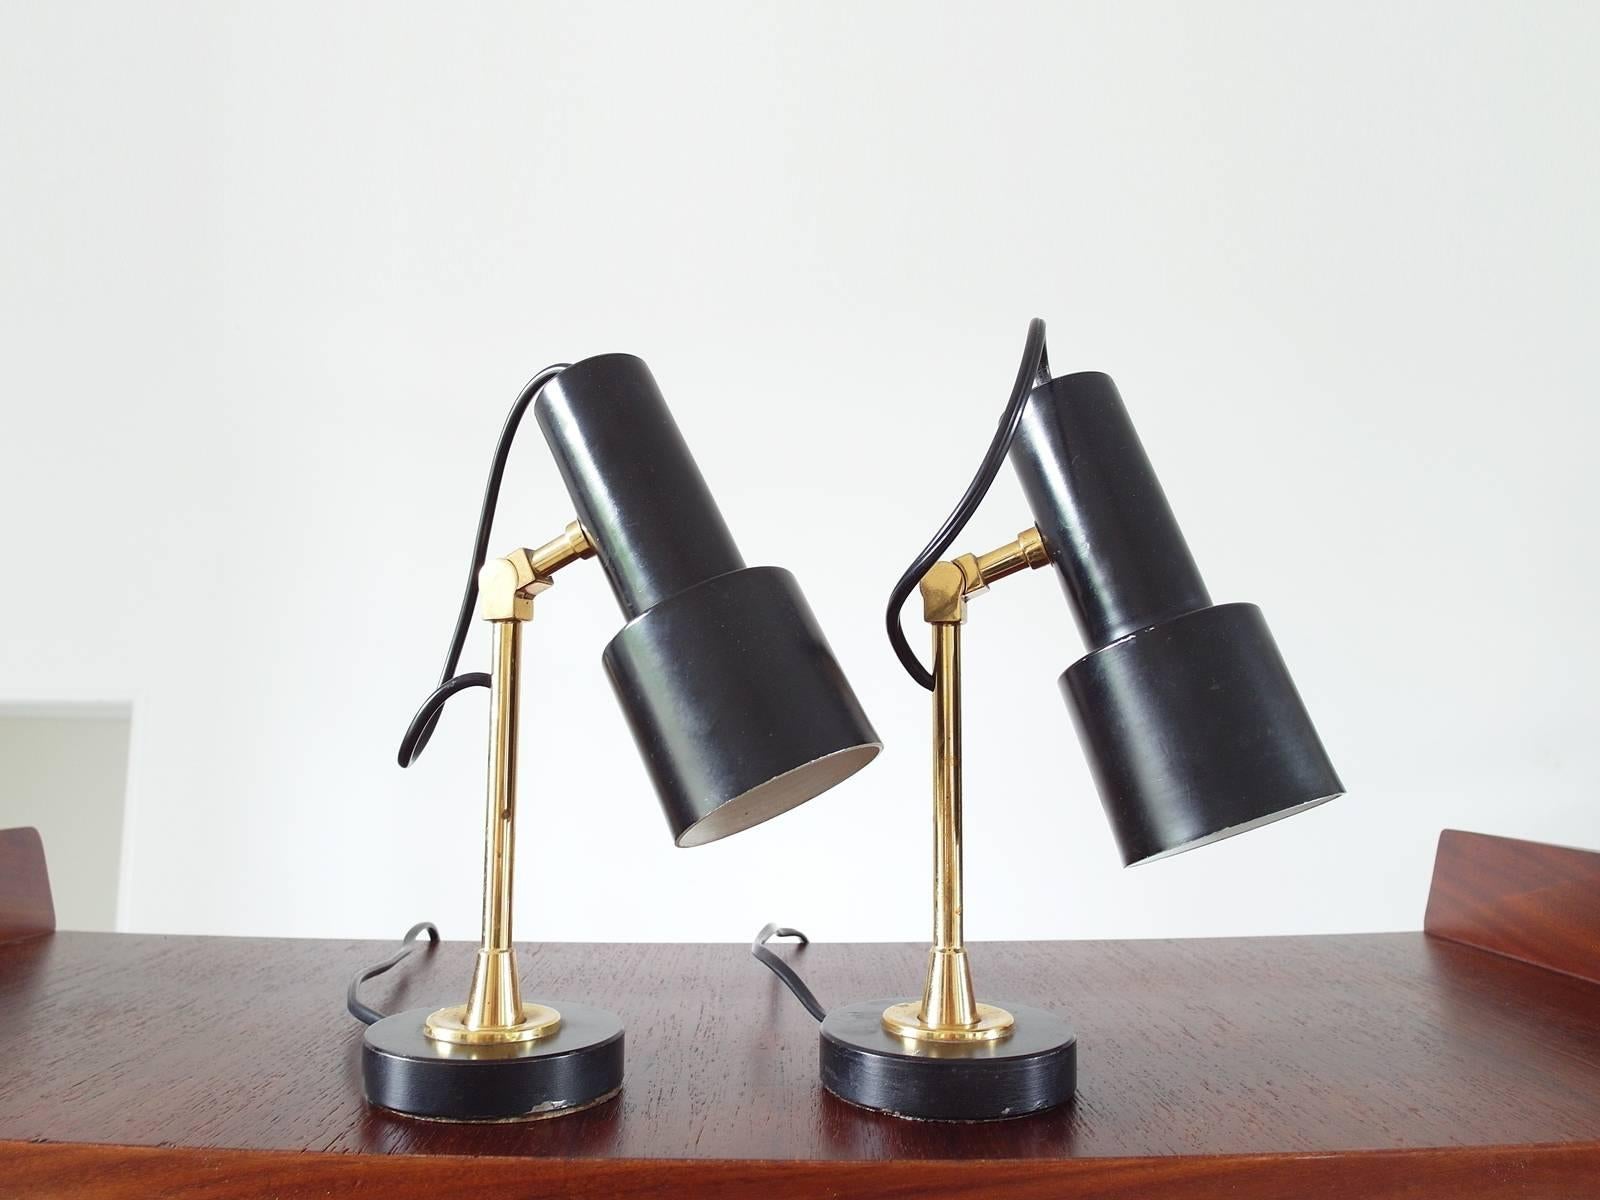 Pair of Original Brass and Black Stilnovo Table Lamps, Italy, 1950s For Sale 2